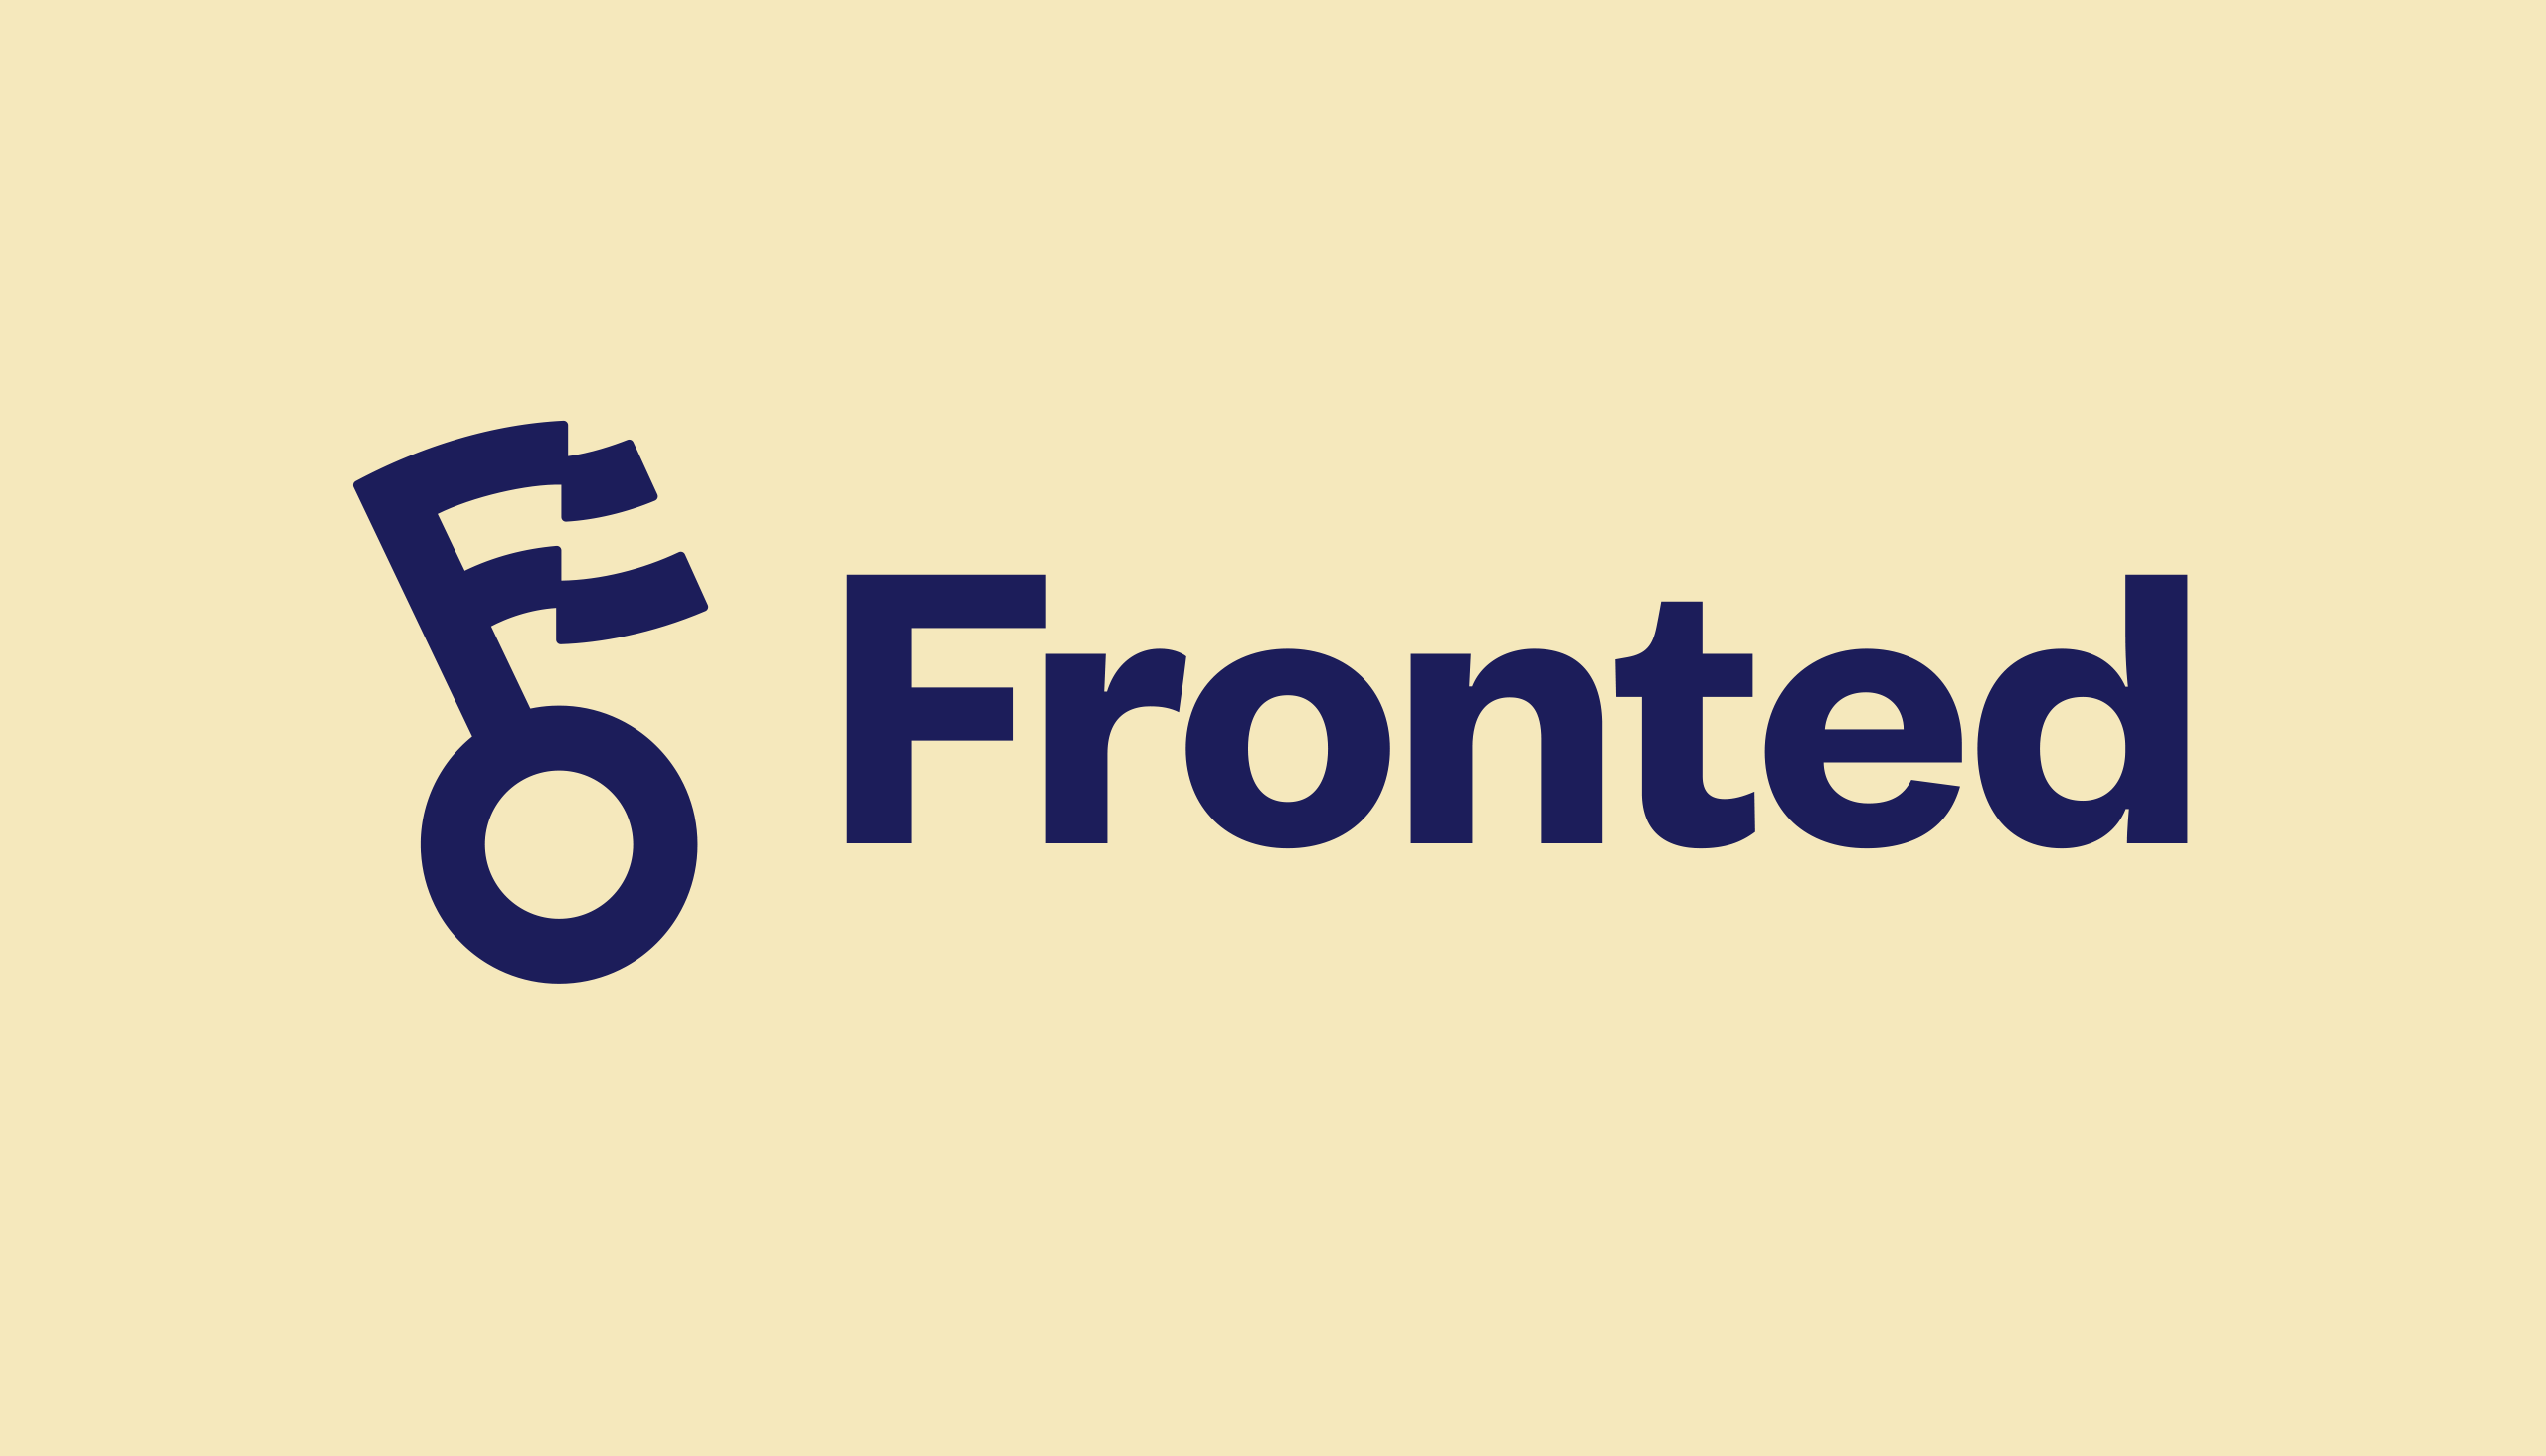 Fronted Wordmark and Symbol by Dan Forster and Elmwood